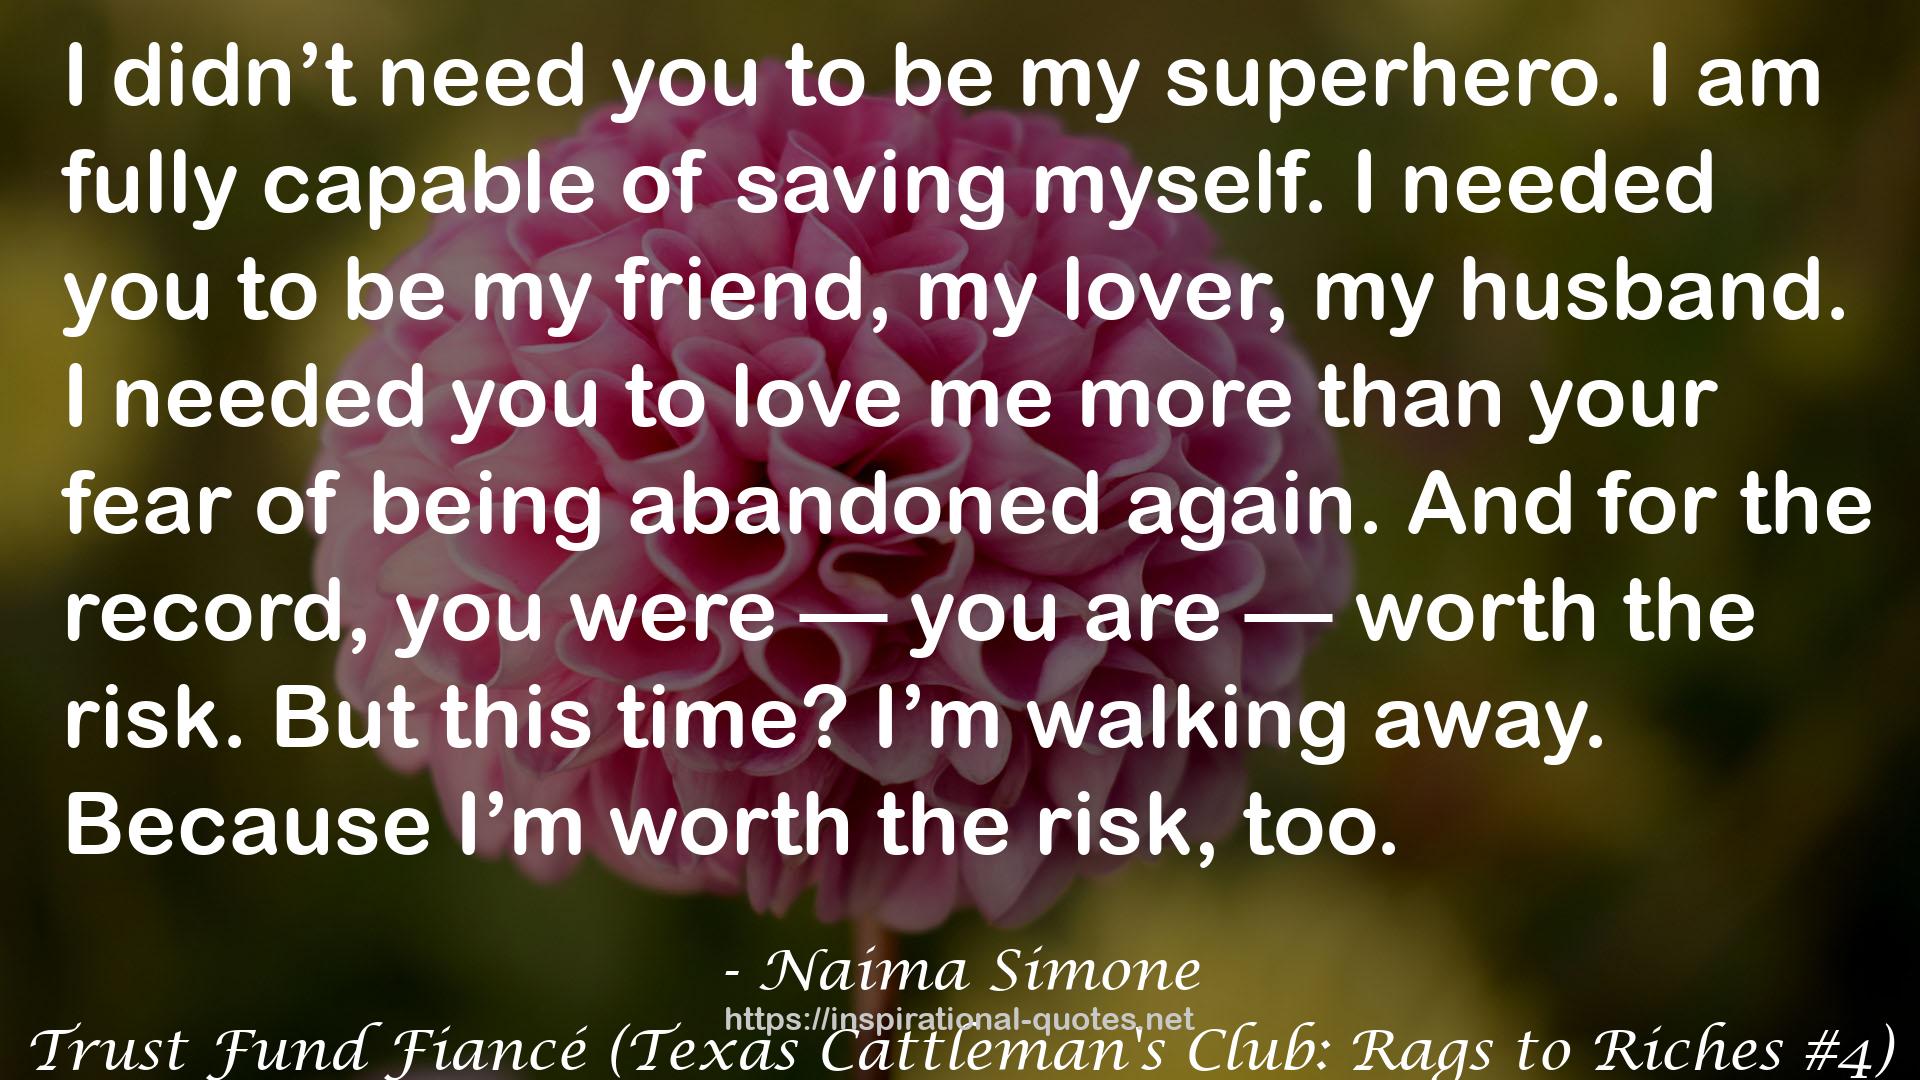 Trust Fund Fiancé (Texas Cattleman's Club: Rags to Riches #4) QUOTES